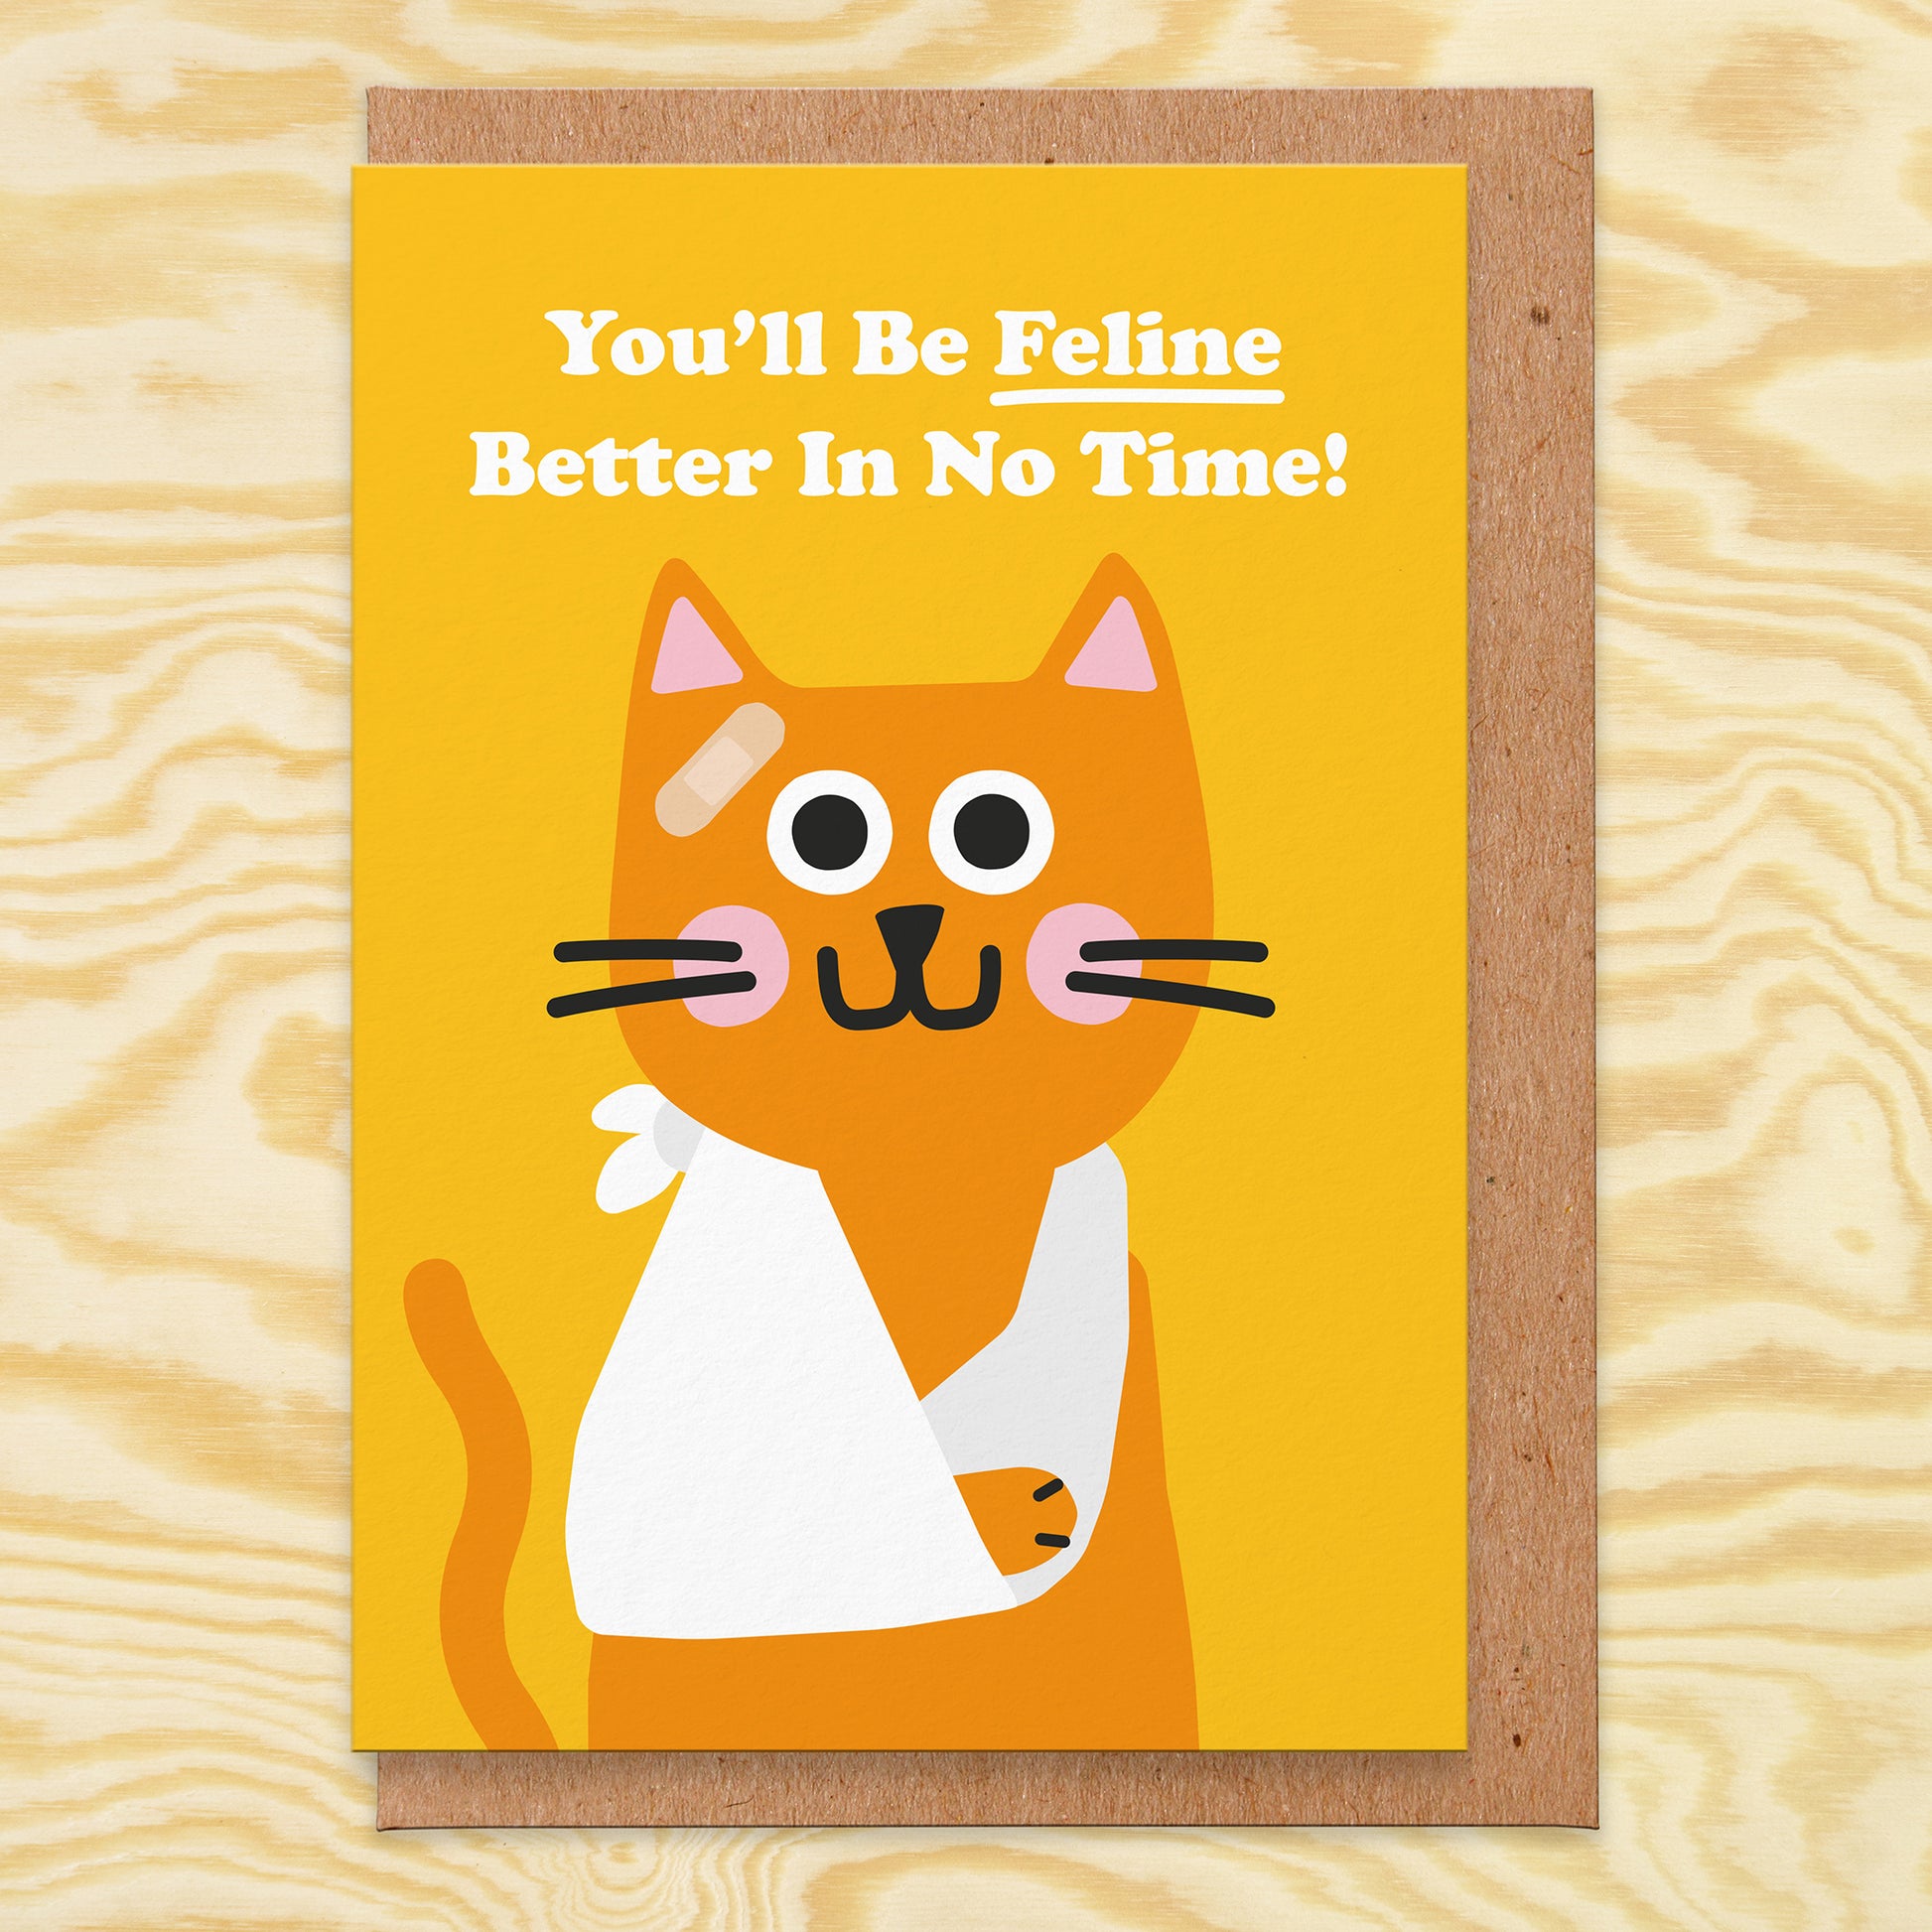 Get Well Soon card that reads You'll Be Feline Better In No Time! With a picture of a ginger cat wearing a sling on its arm and a plaster on it's head.